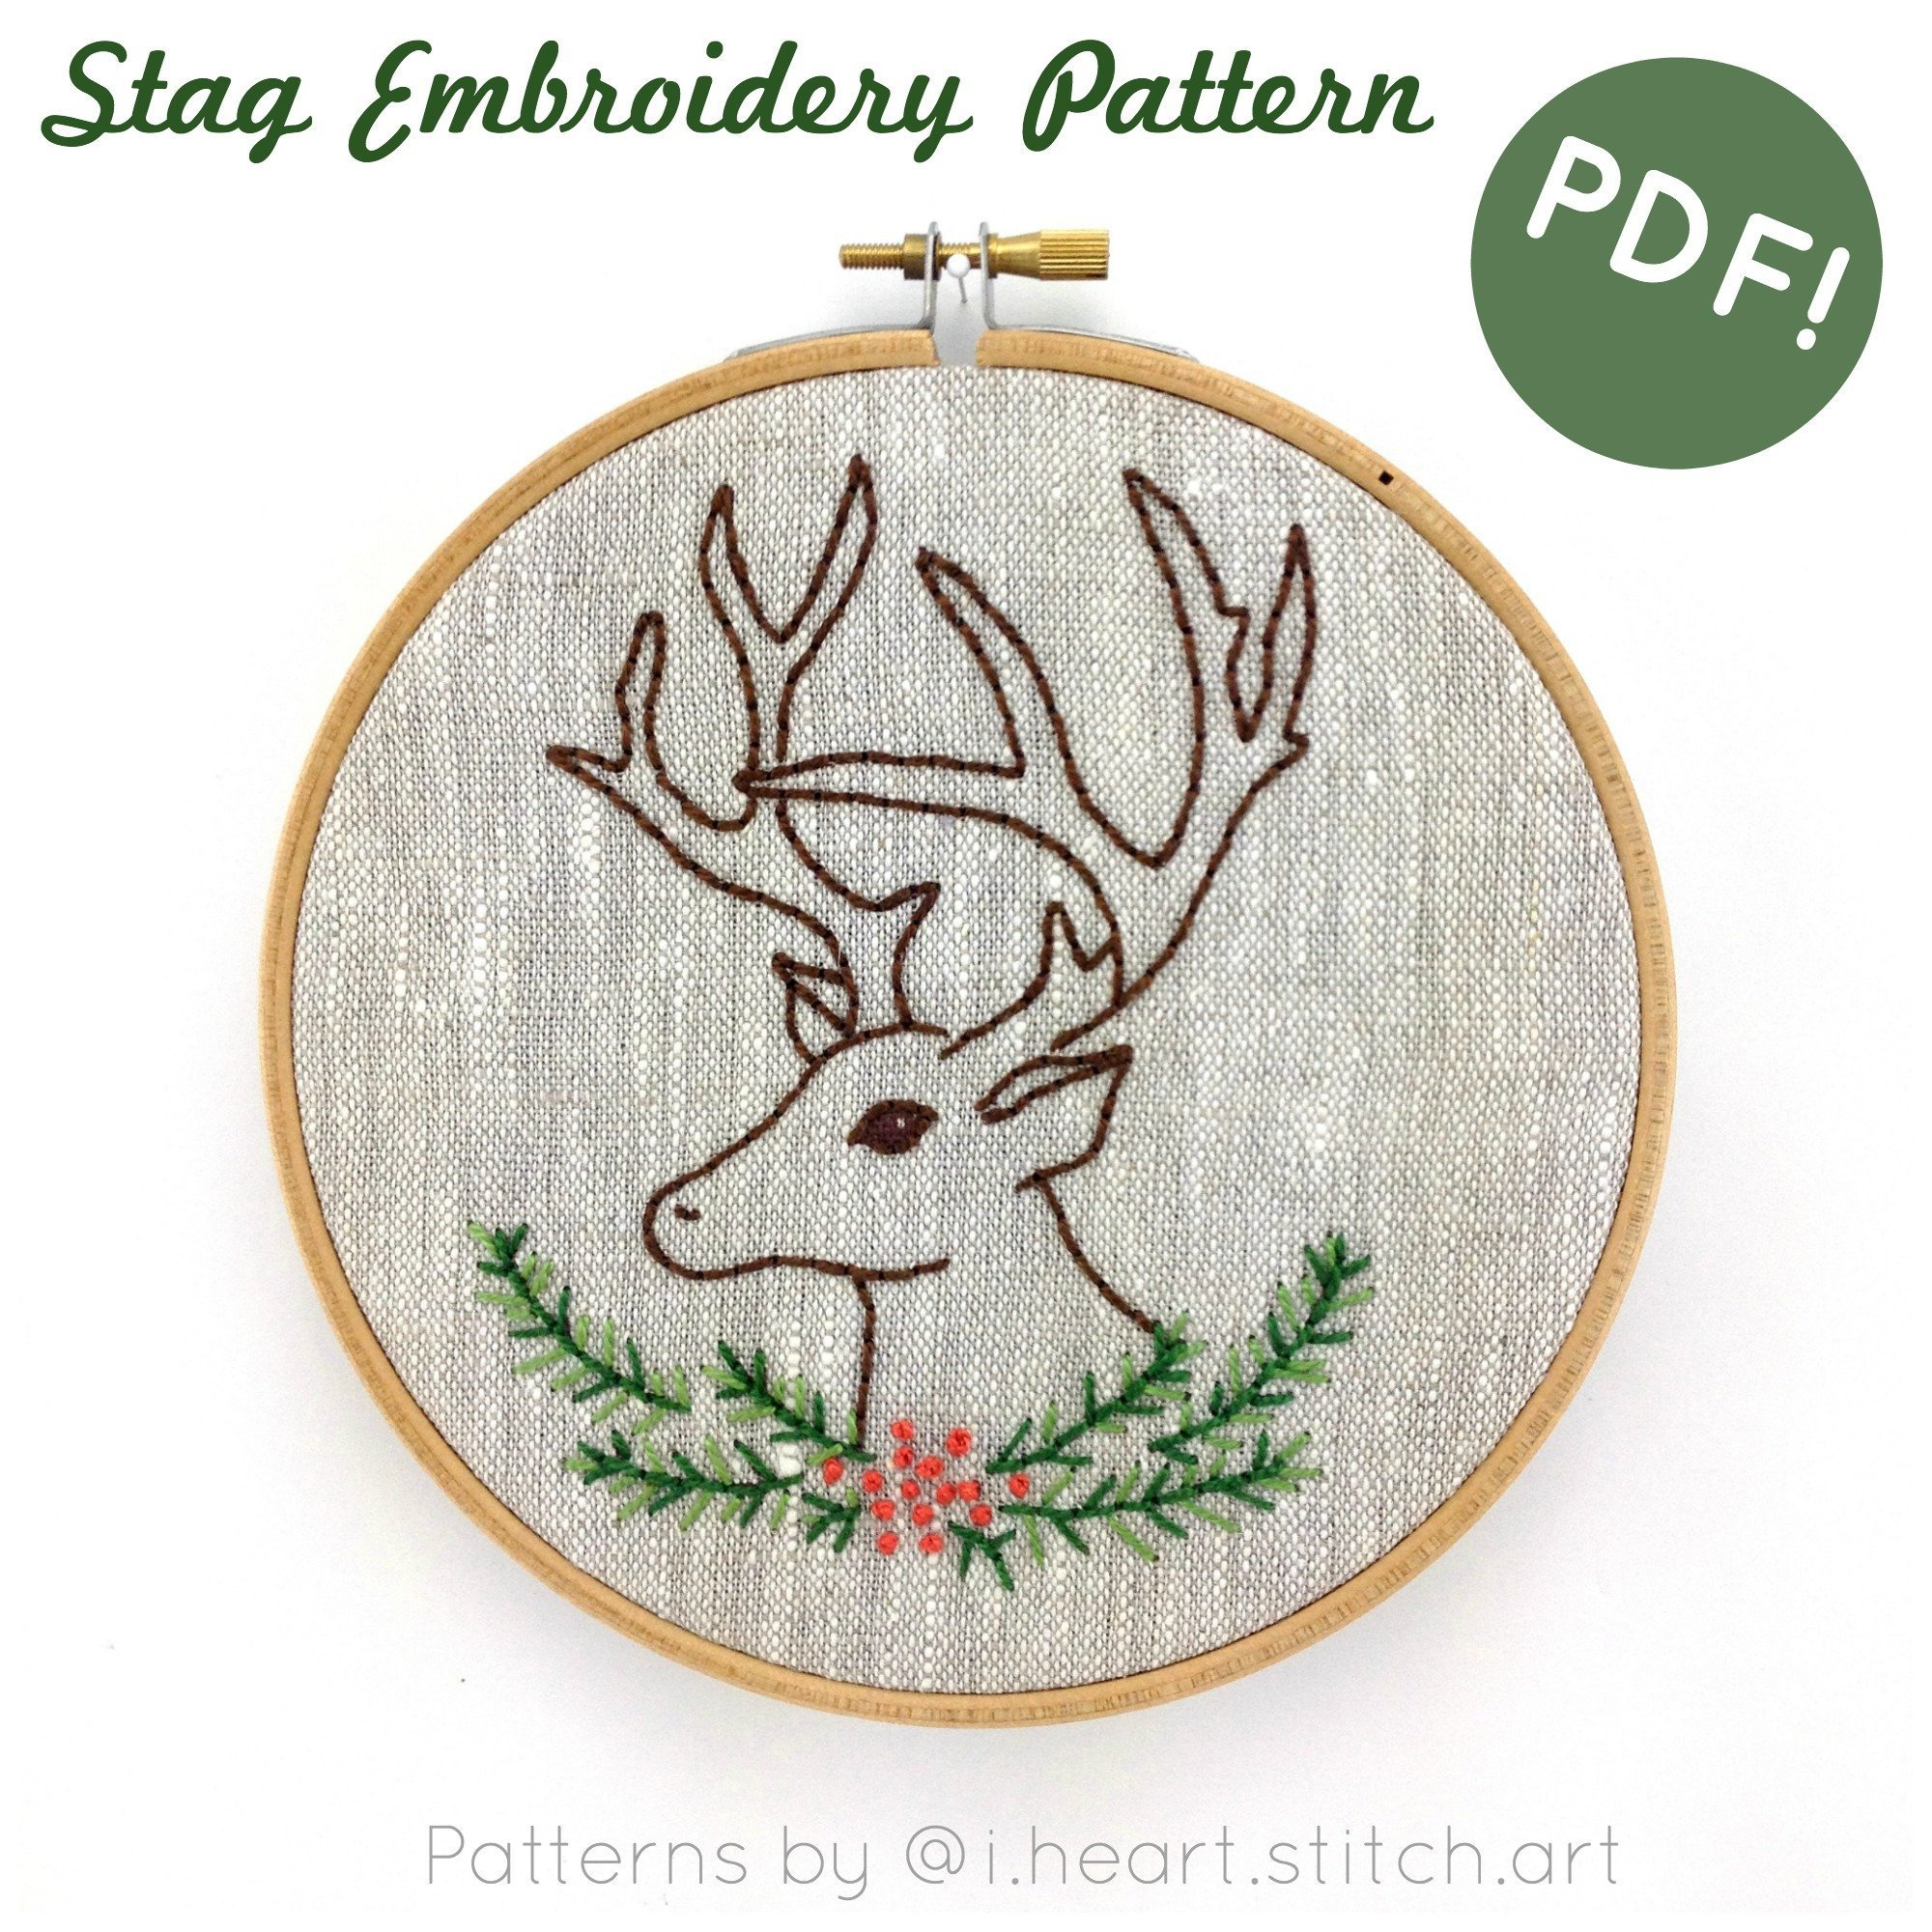 Make Your Own Embroidery Pattern Stag Embroidery Pattern Digital Download